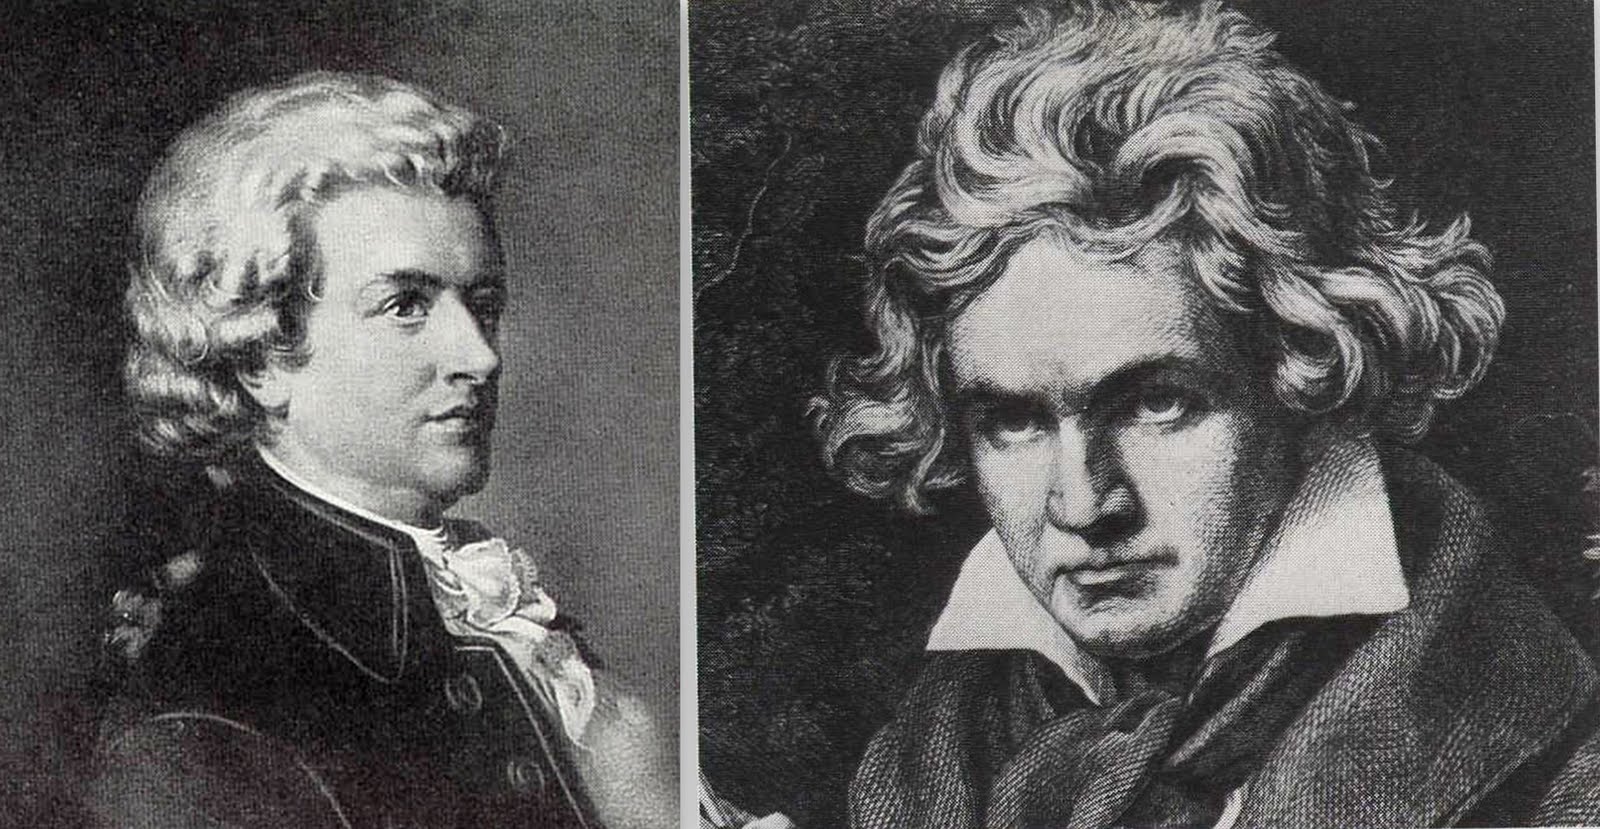 compare mozart and beethoven